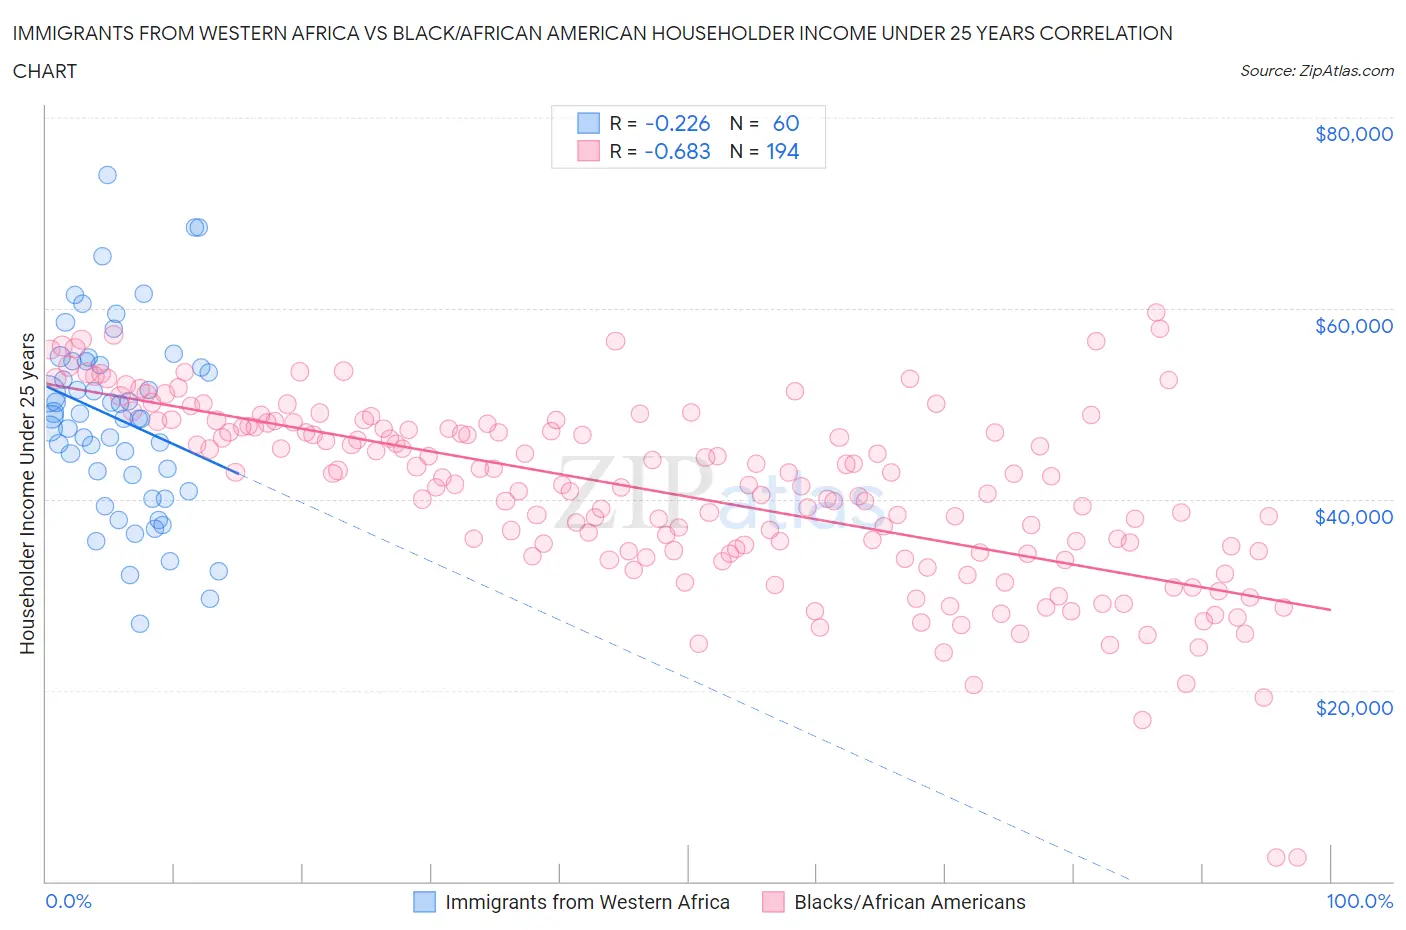 Immigrants from Western Africa vs Black/African American Householder Income Under 25 years